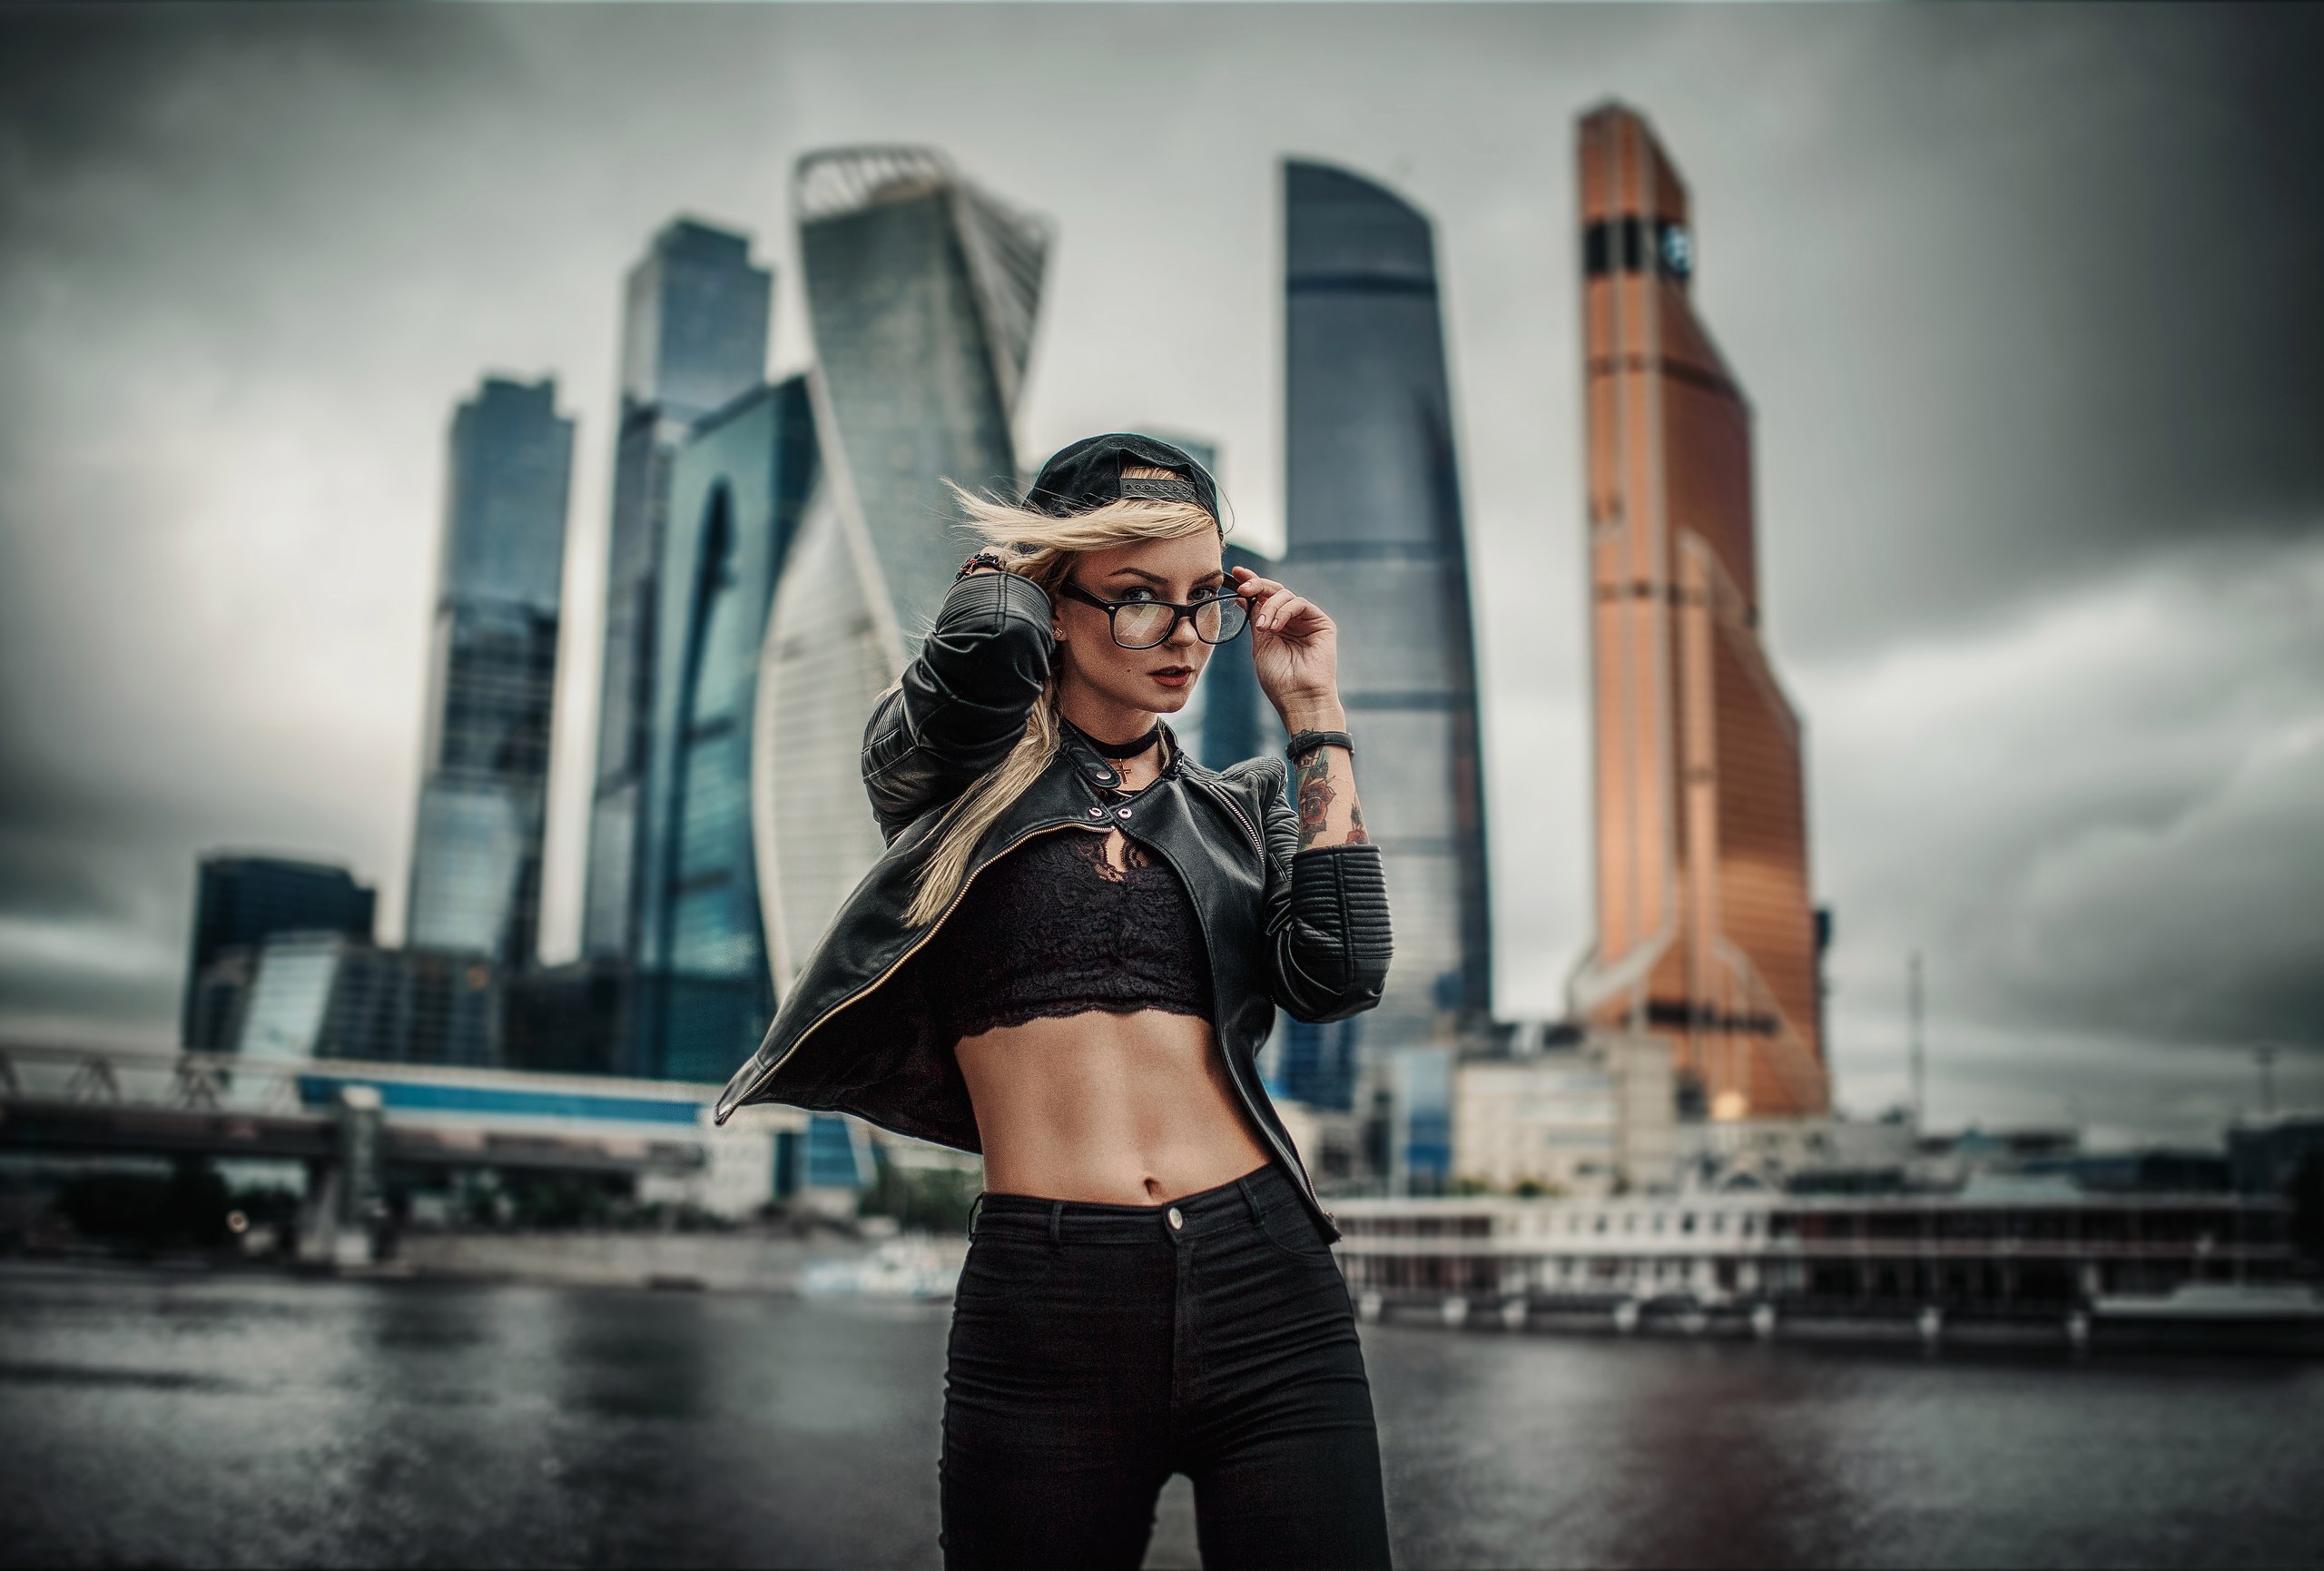 People 2560x1730 Hakan Erenler women model portrait outdoors looking at viewer depth of field water sky city building blonde women with glasses leather jacket short tops black top jeans belly belly button baseball cap necklace tattoo women outdoors urban